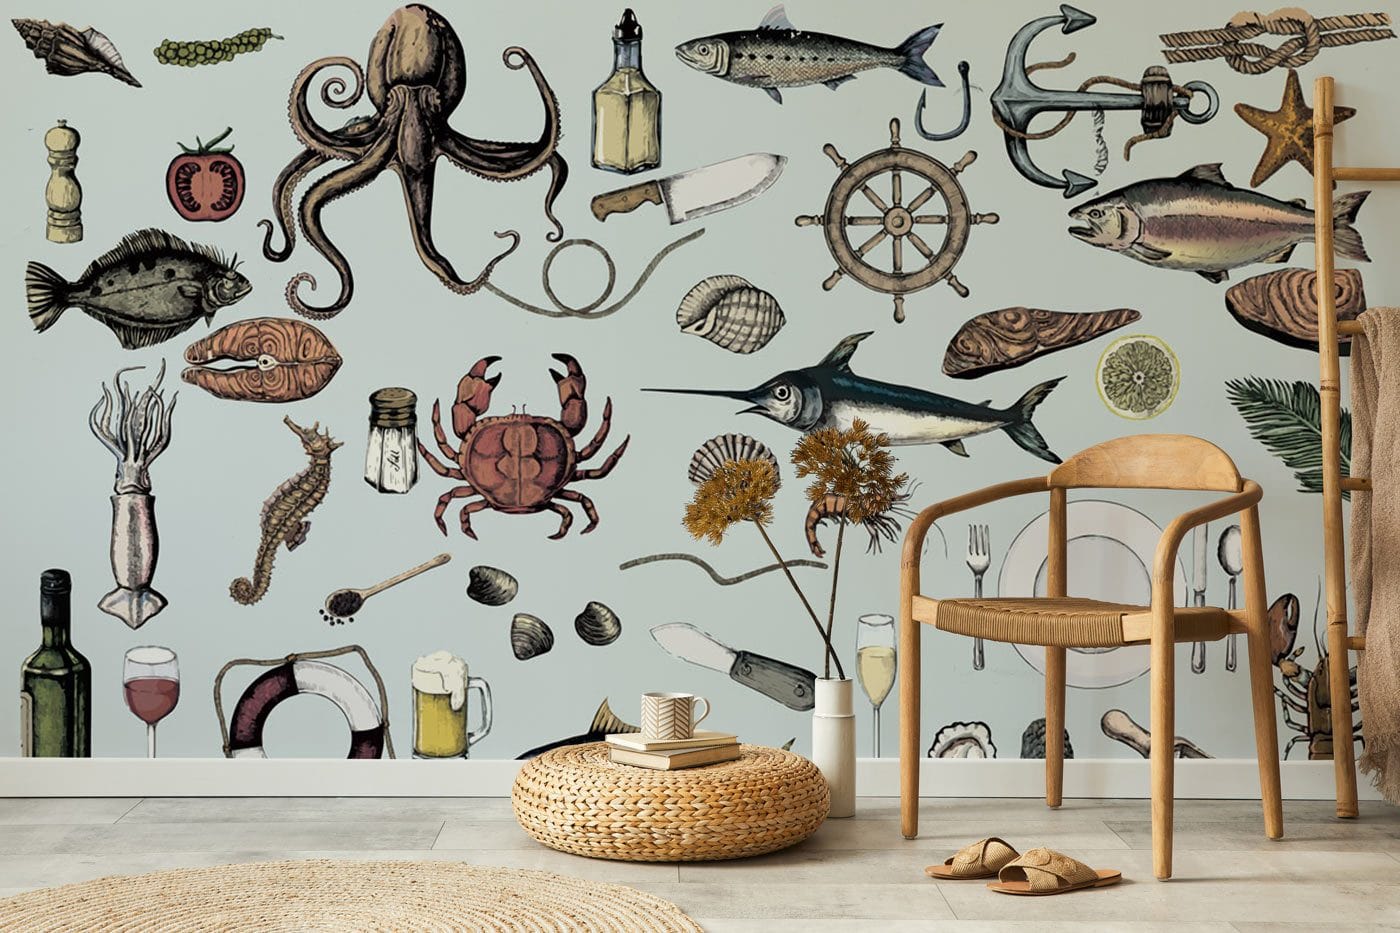 A Few Drinks and Some Fish Ocean Wallpaper Mural for the Decoration of the Living Room